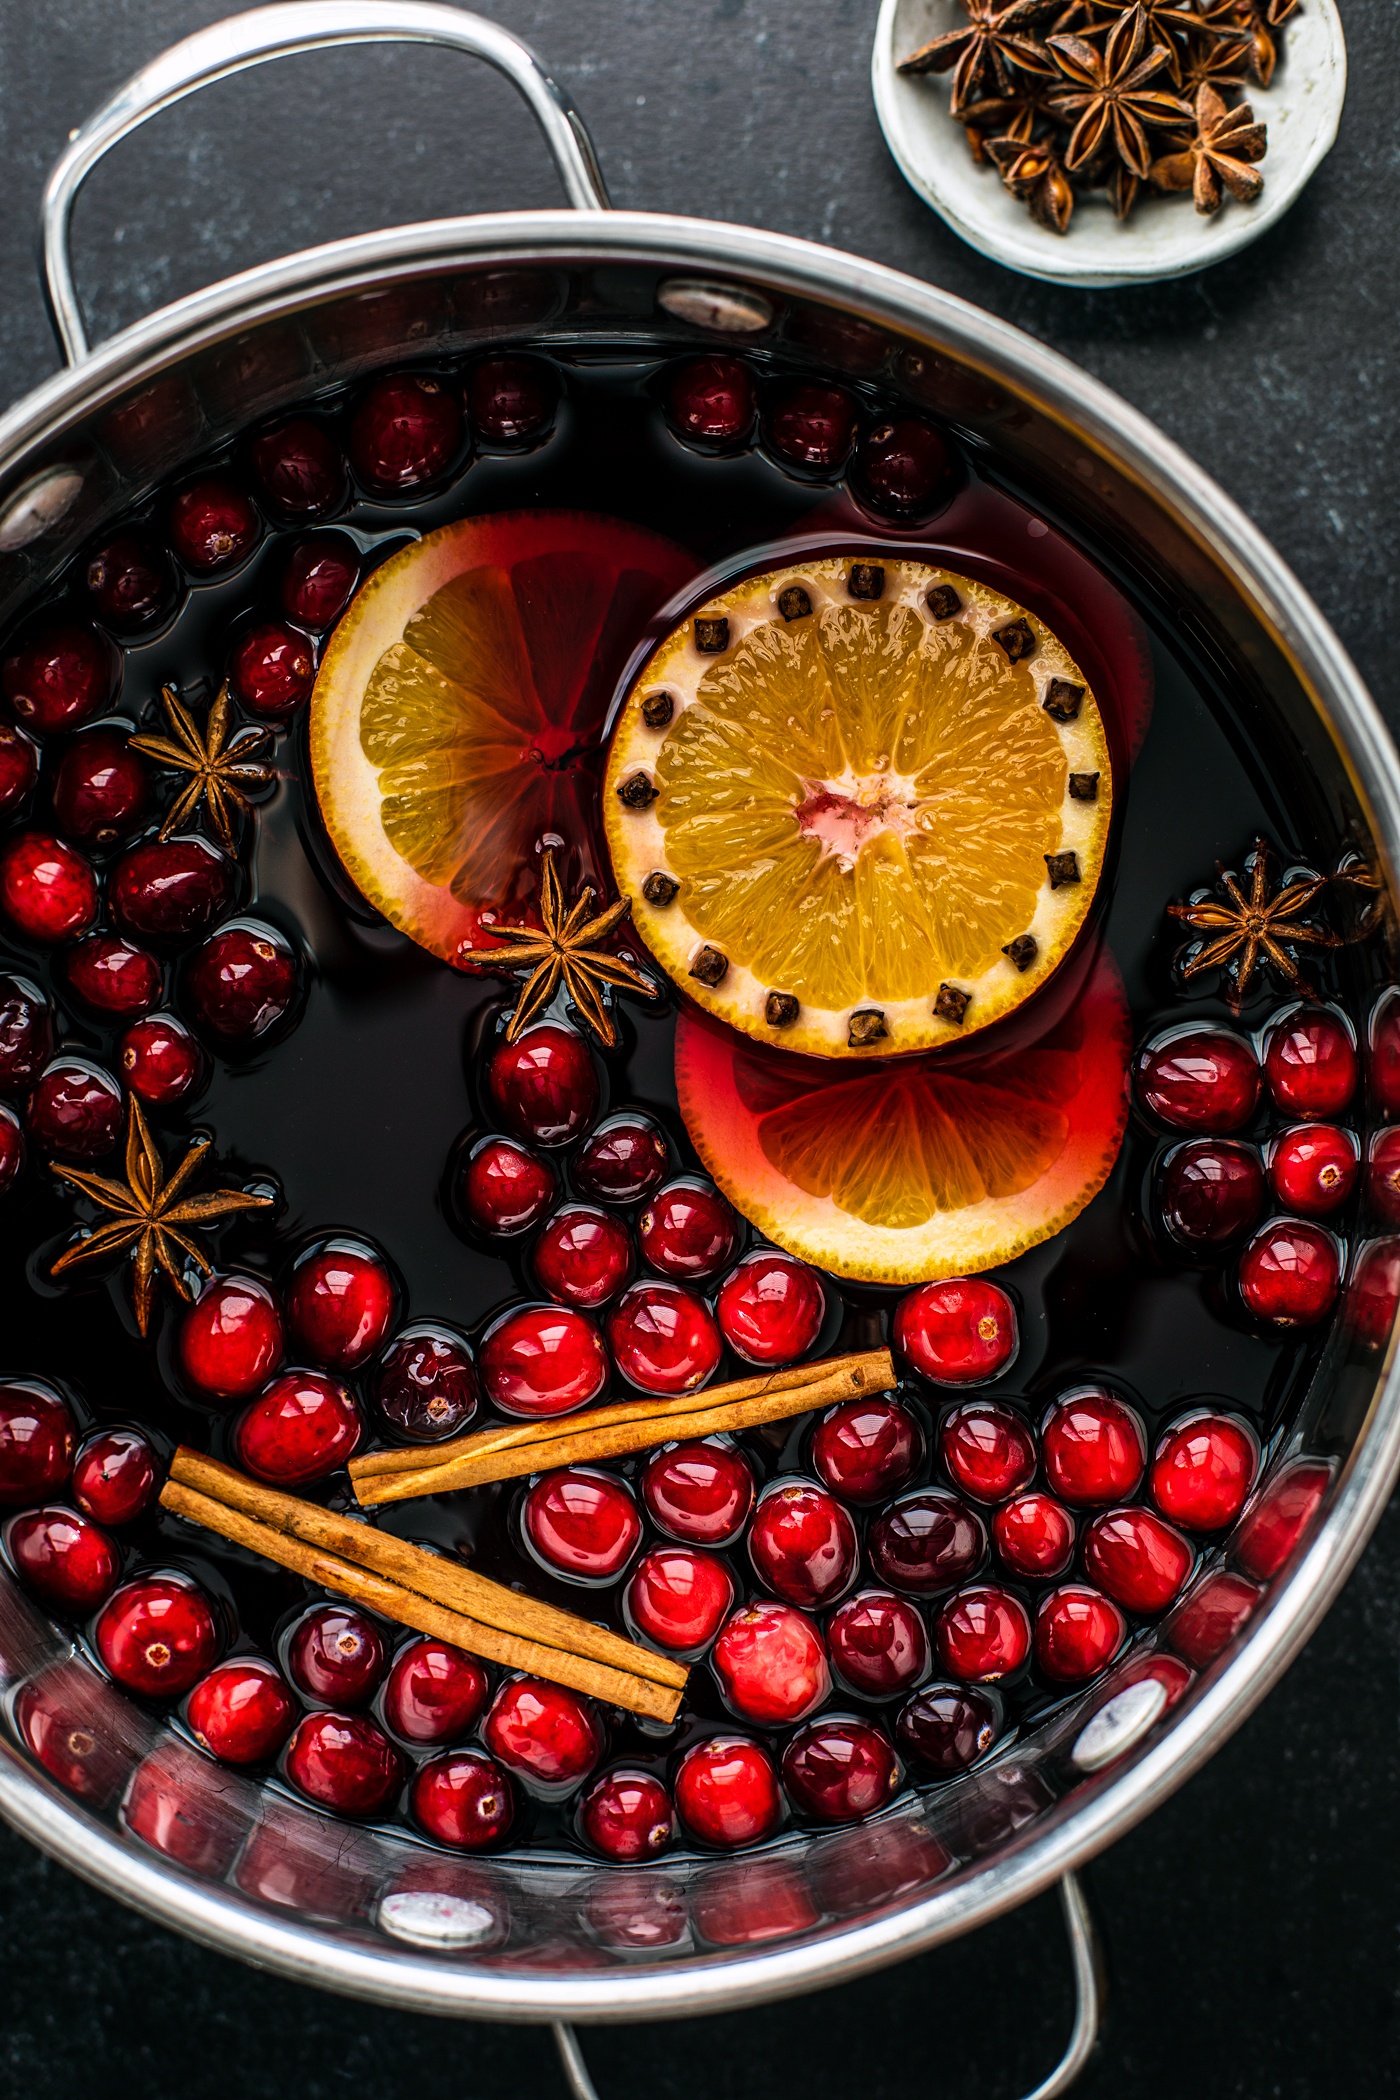 Large saucepan filled with mulled wine, cranberries, cinnamon sticks, orange slices, and star anise.